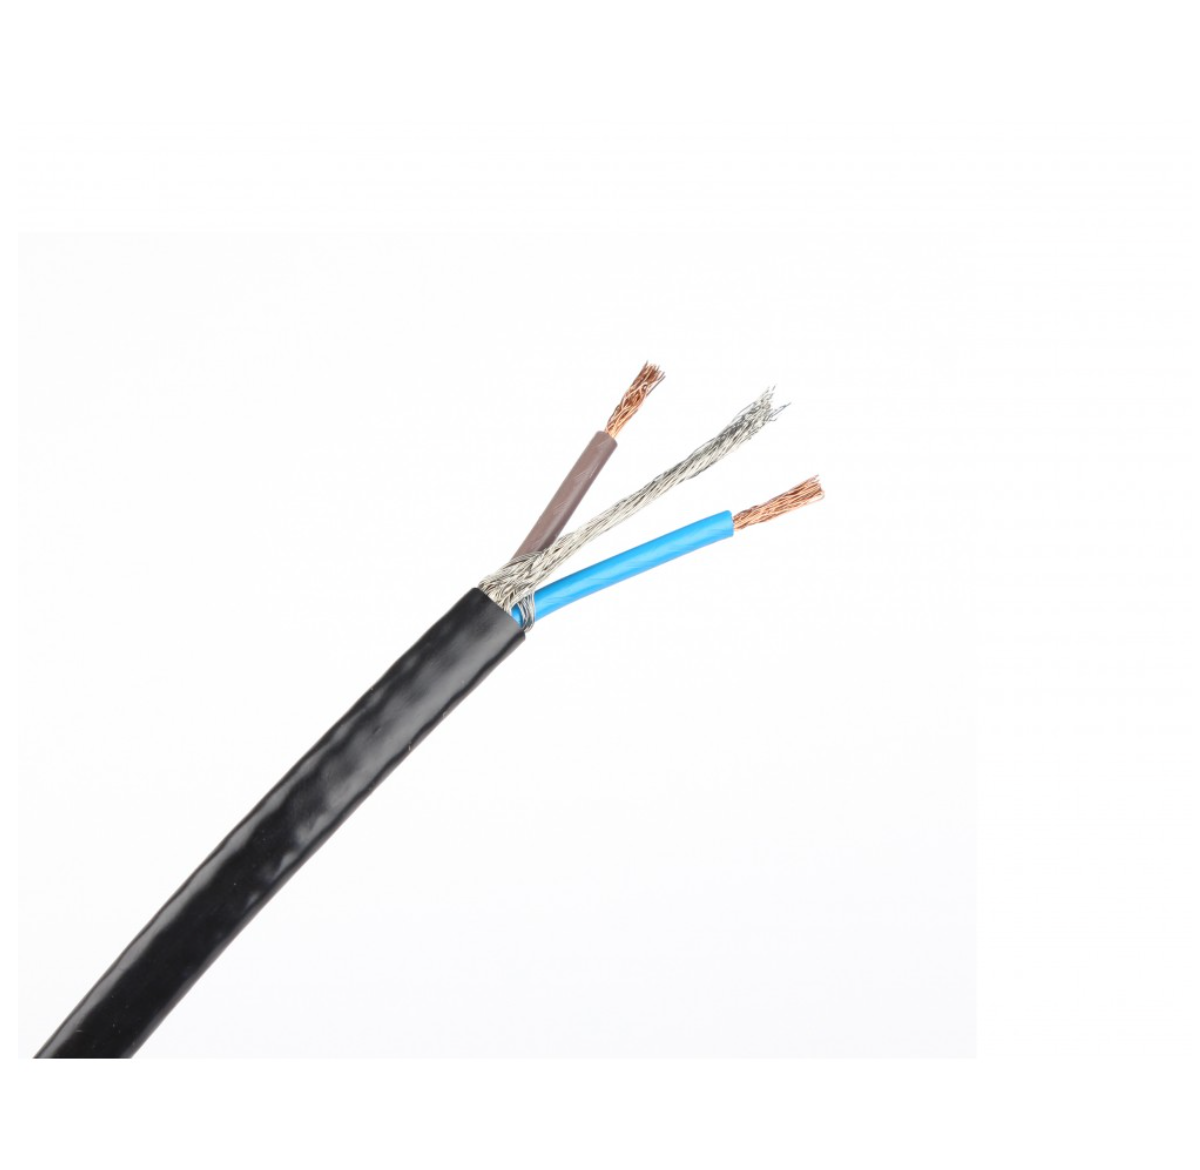 Heating cable - 25m